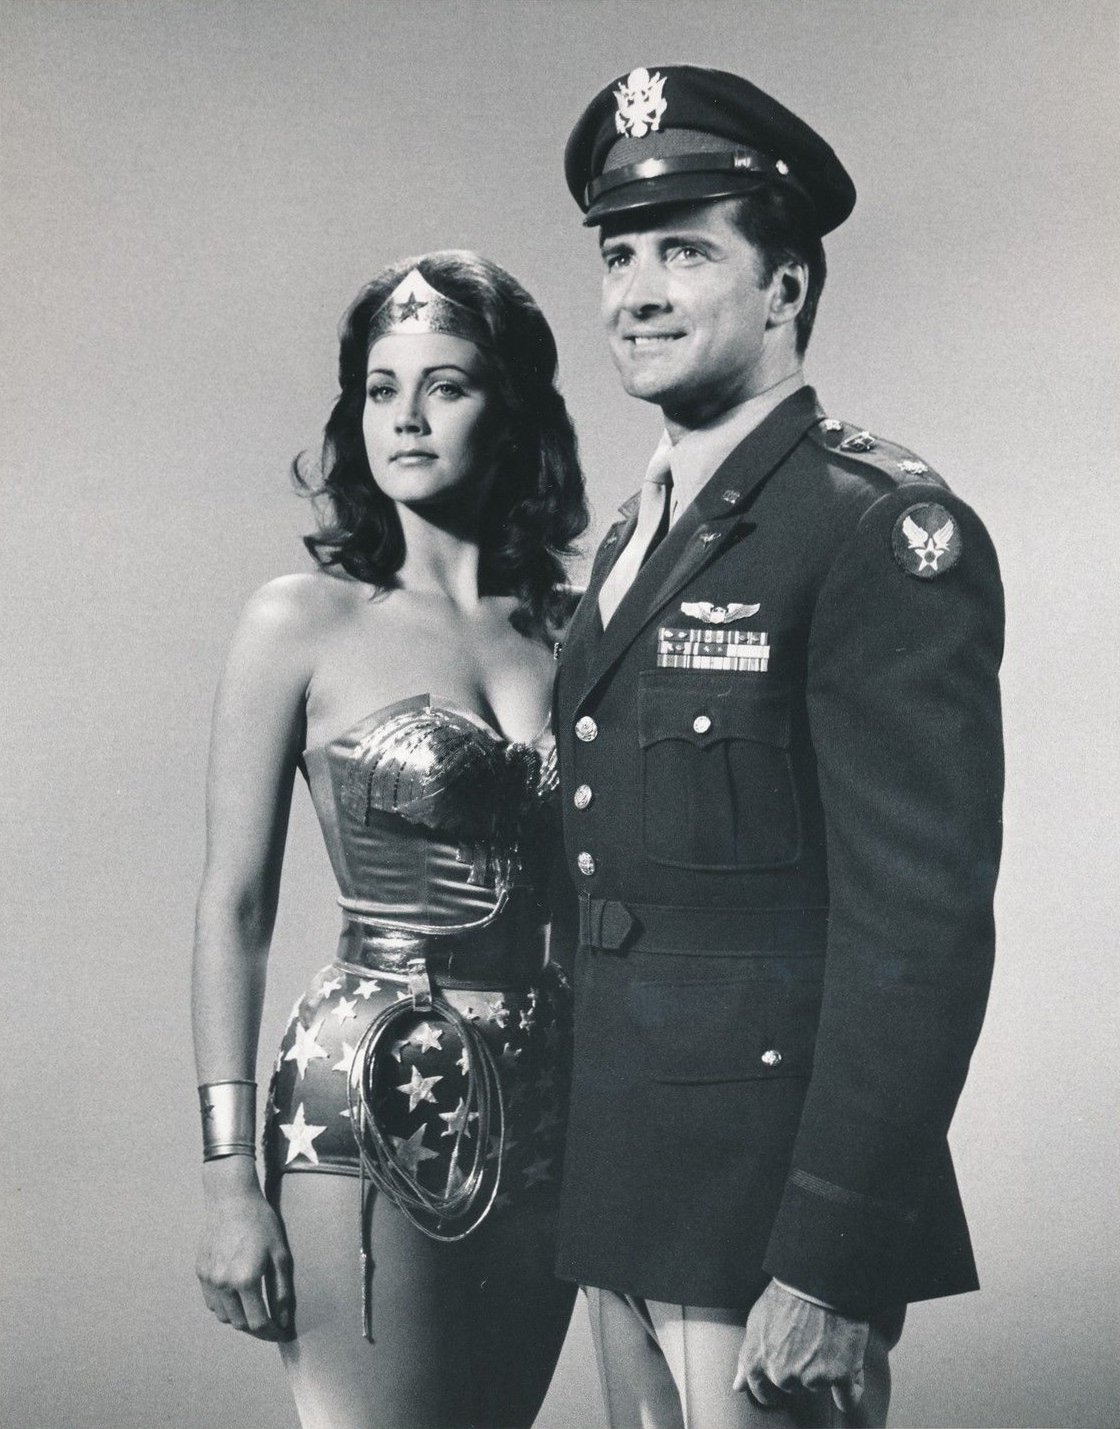 Lynda Carter and Lyle Waggoner star in "Fausta: The Nazi Wonder Woman" circa 1976. | Source: Wikimedia Commons